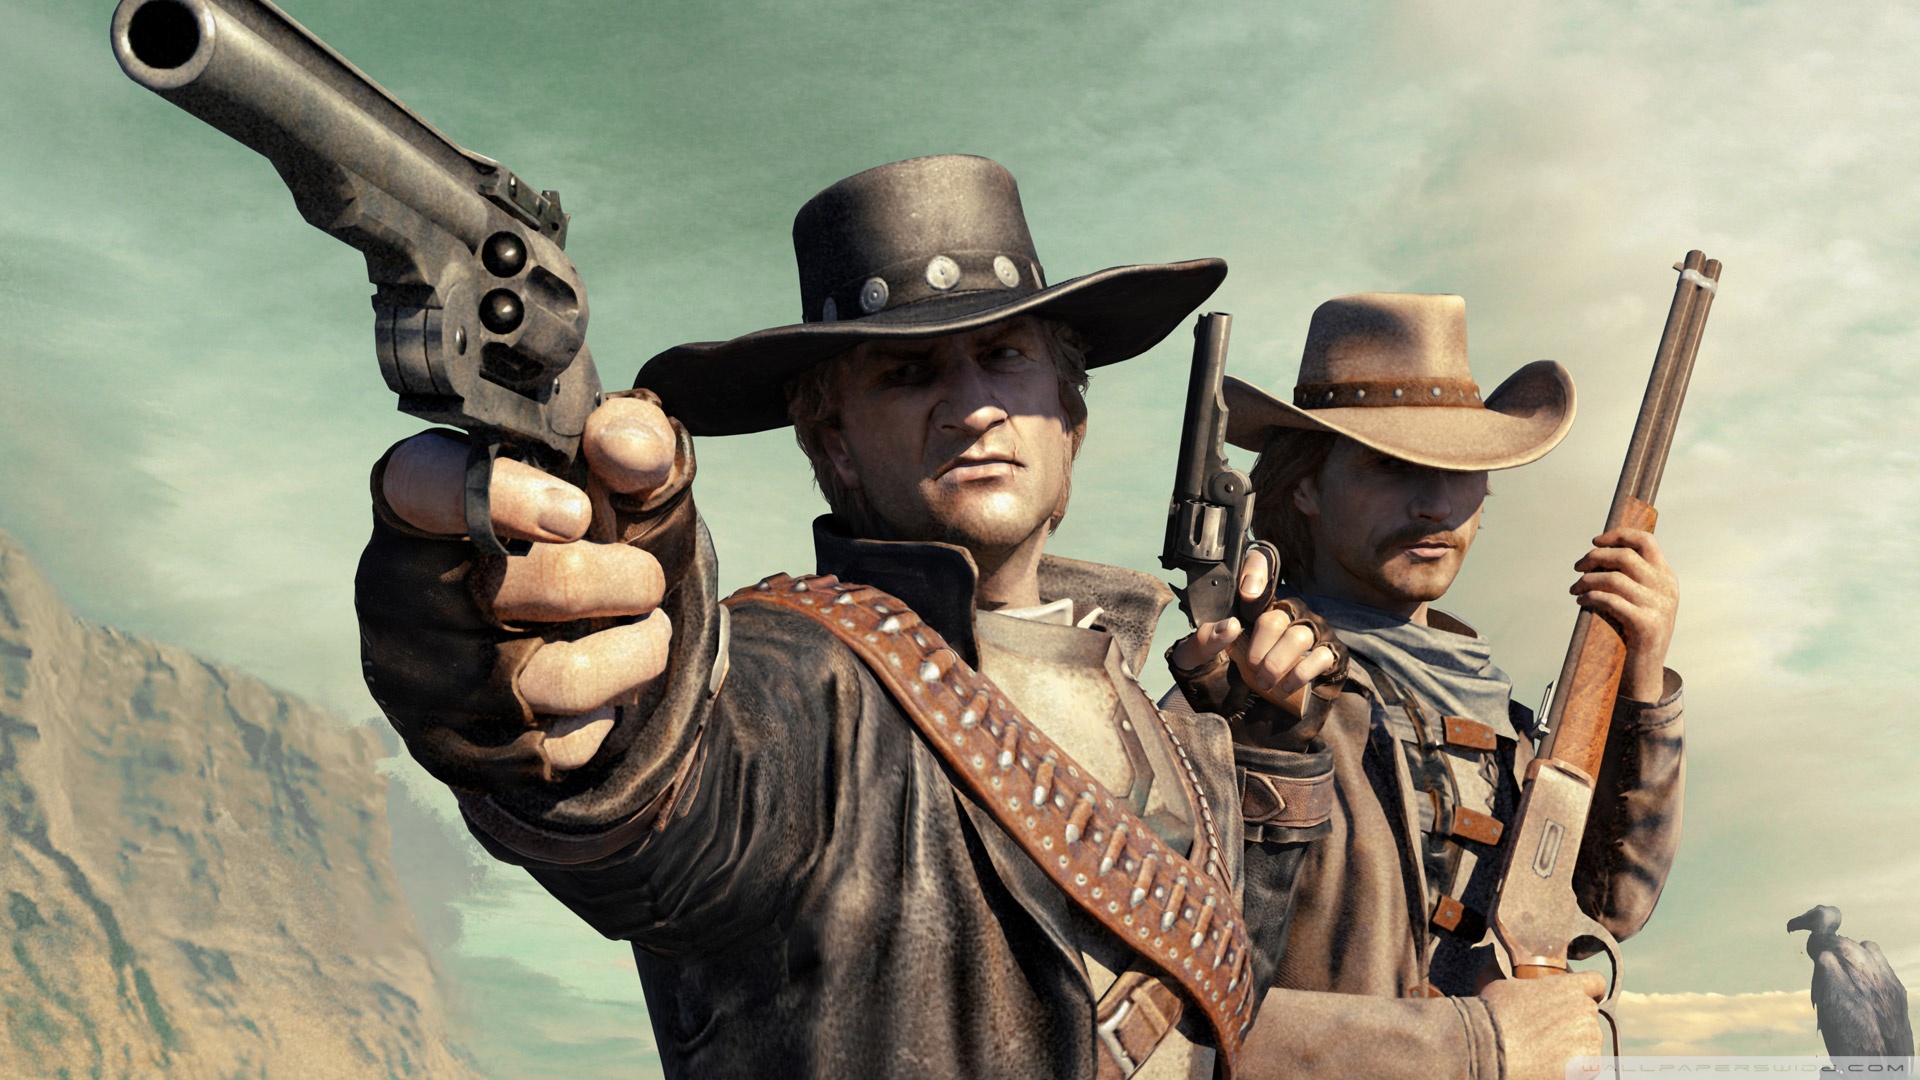 Call Of Juarez: Bound In Blood Backgrounds, Compatible - PC, Mobile, Gadgets| 1920x1080 px